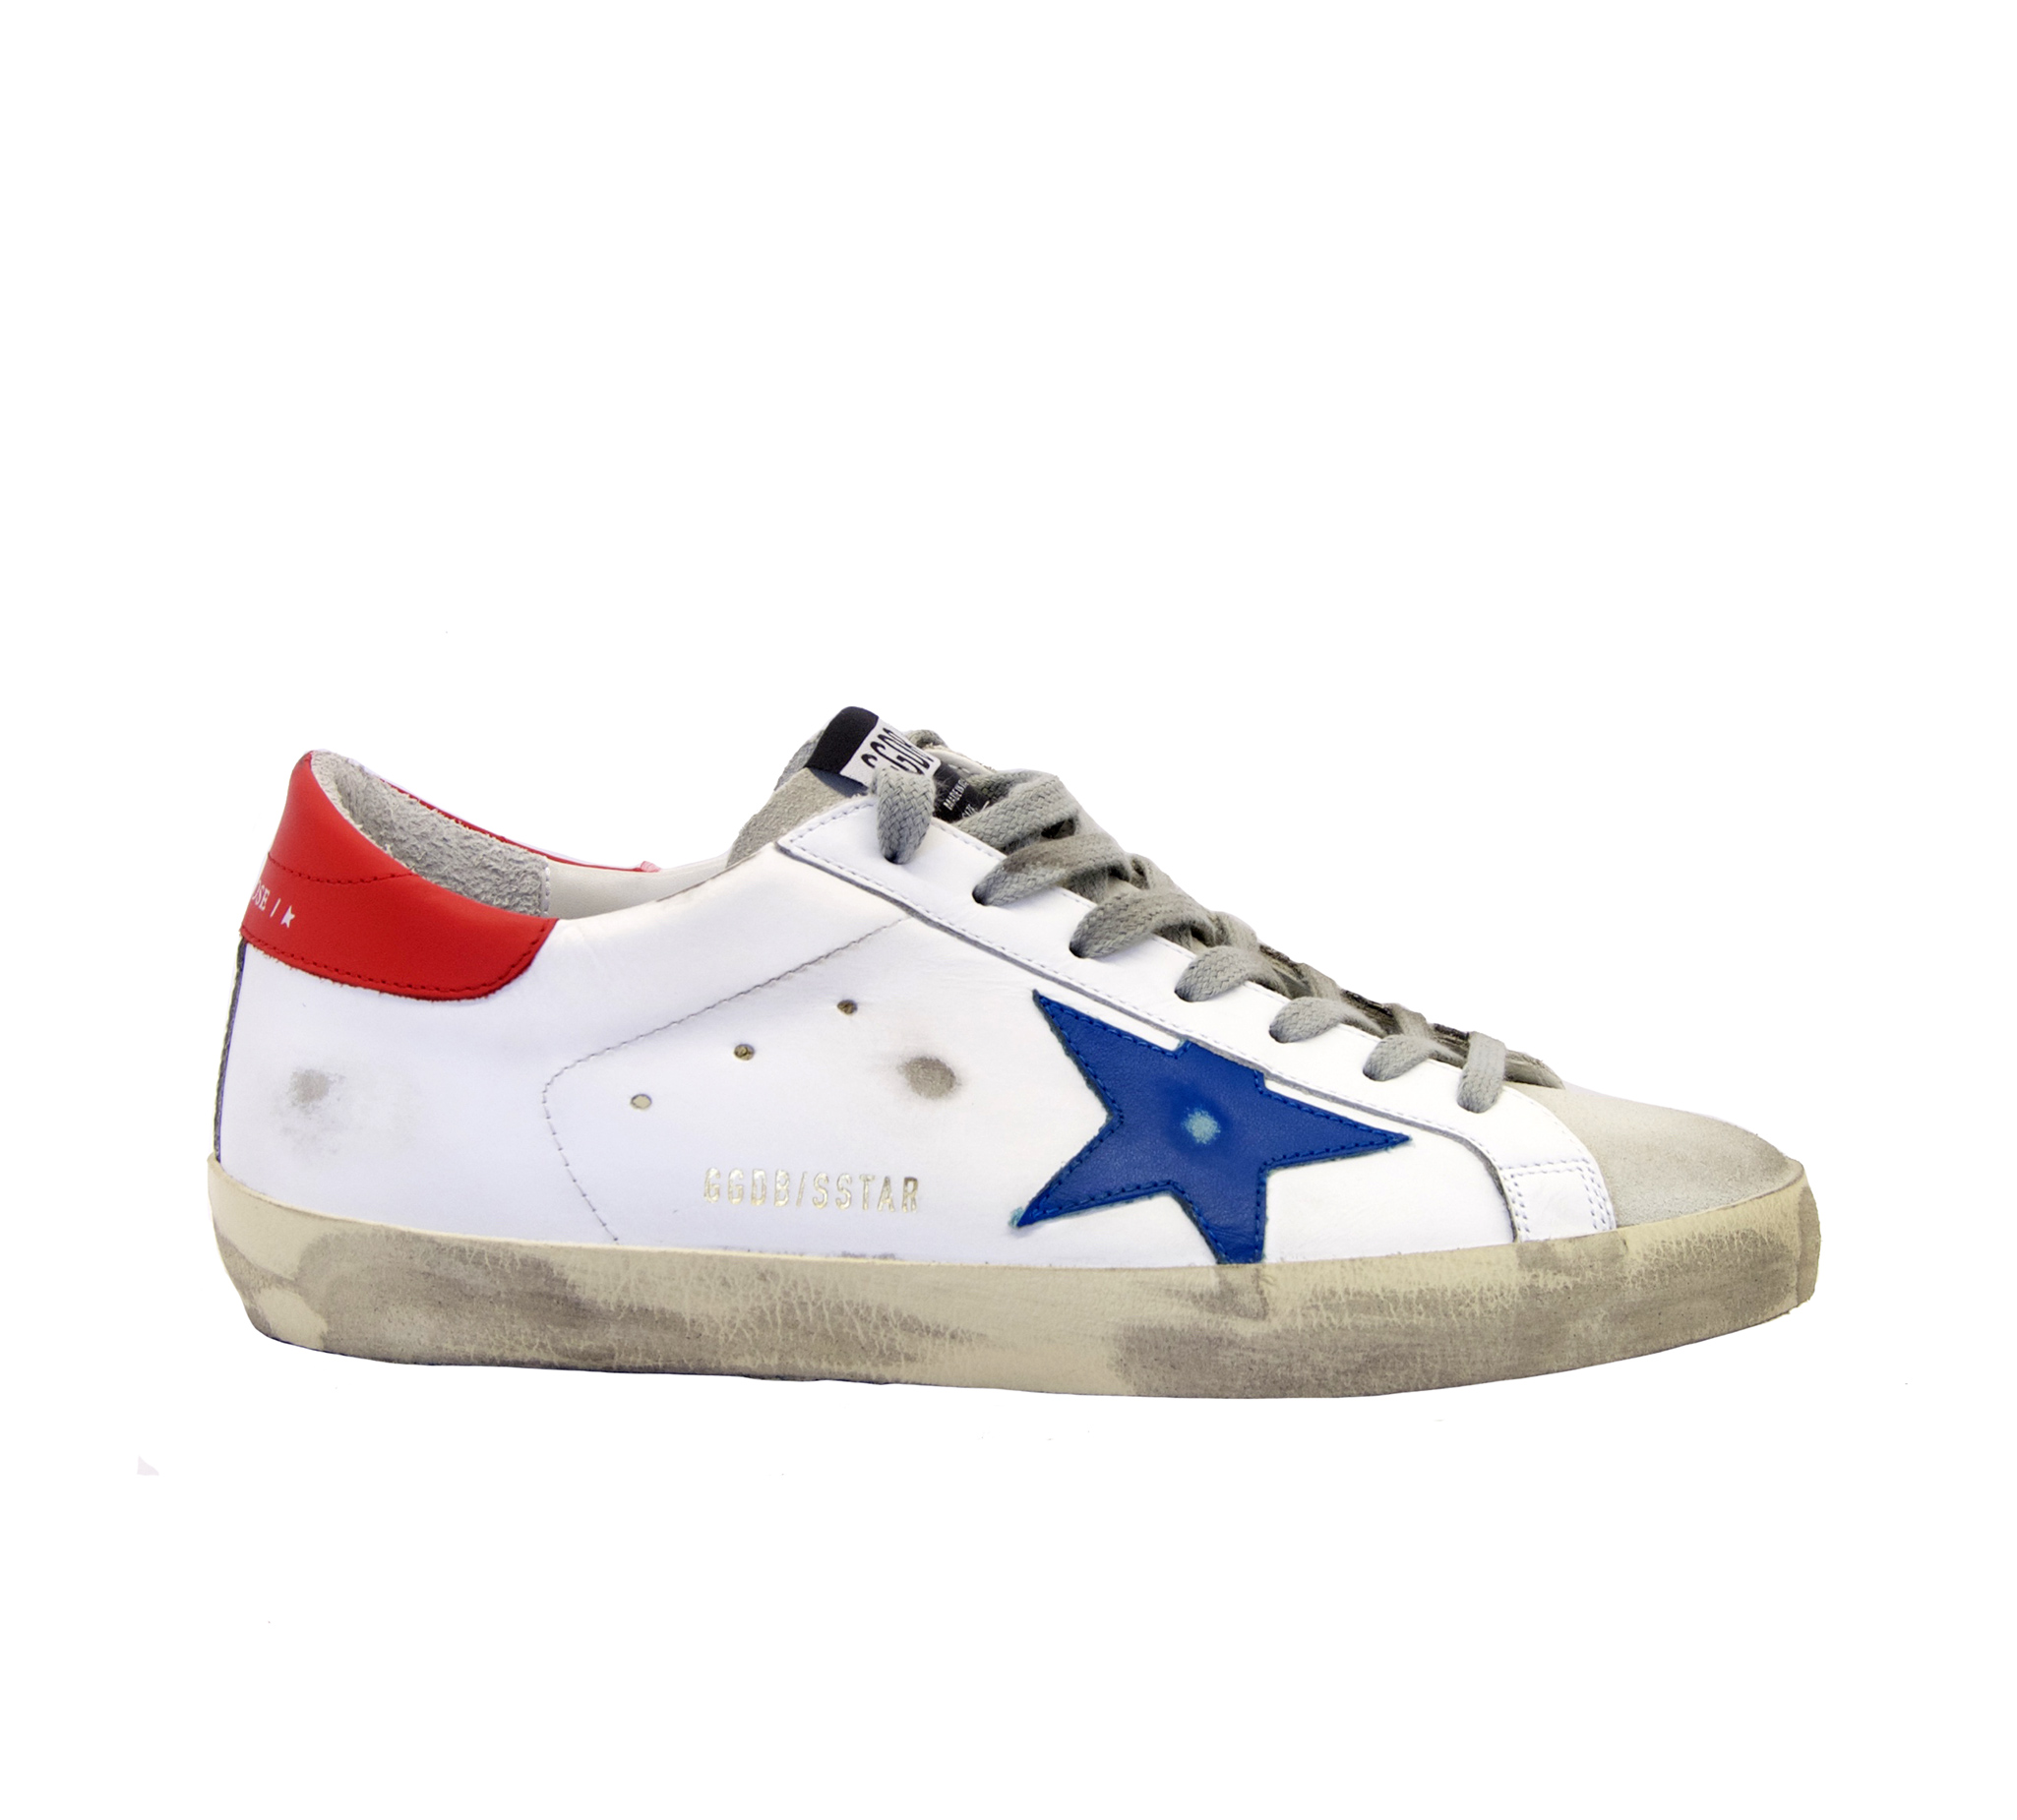 Golden goose - Sneakers superstar bianco blu rosso - Mary Claud